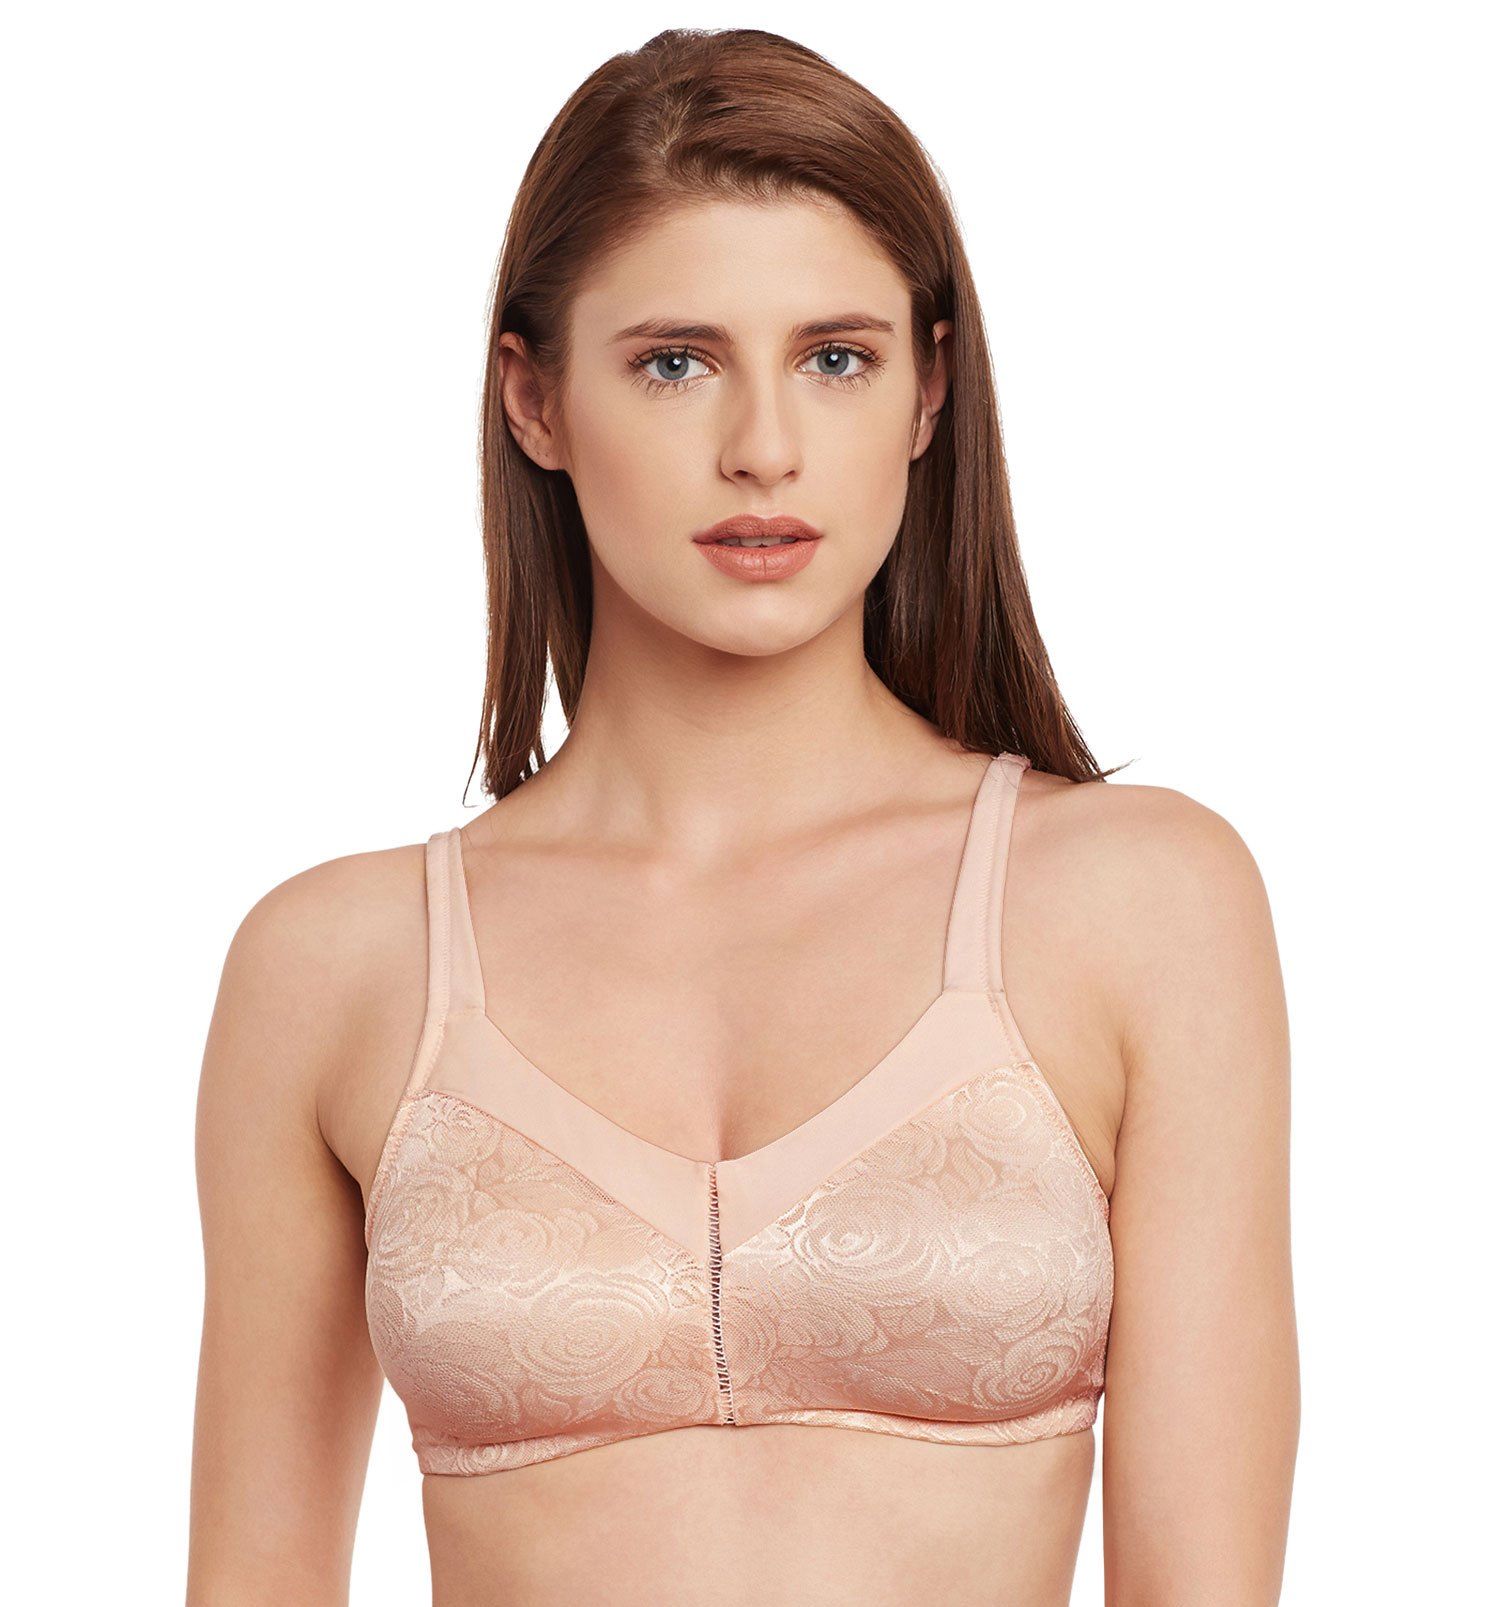 Wacoal Awareness Non-Wire Soft Cup Bra 85276